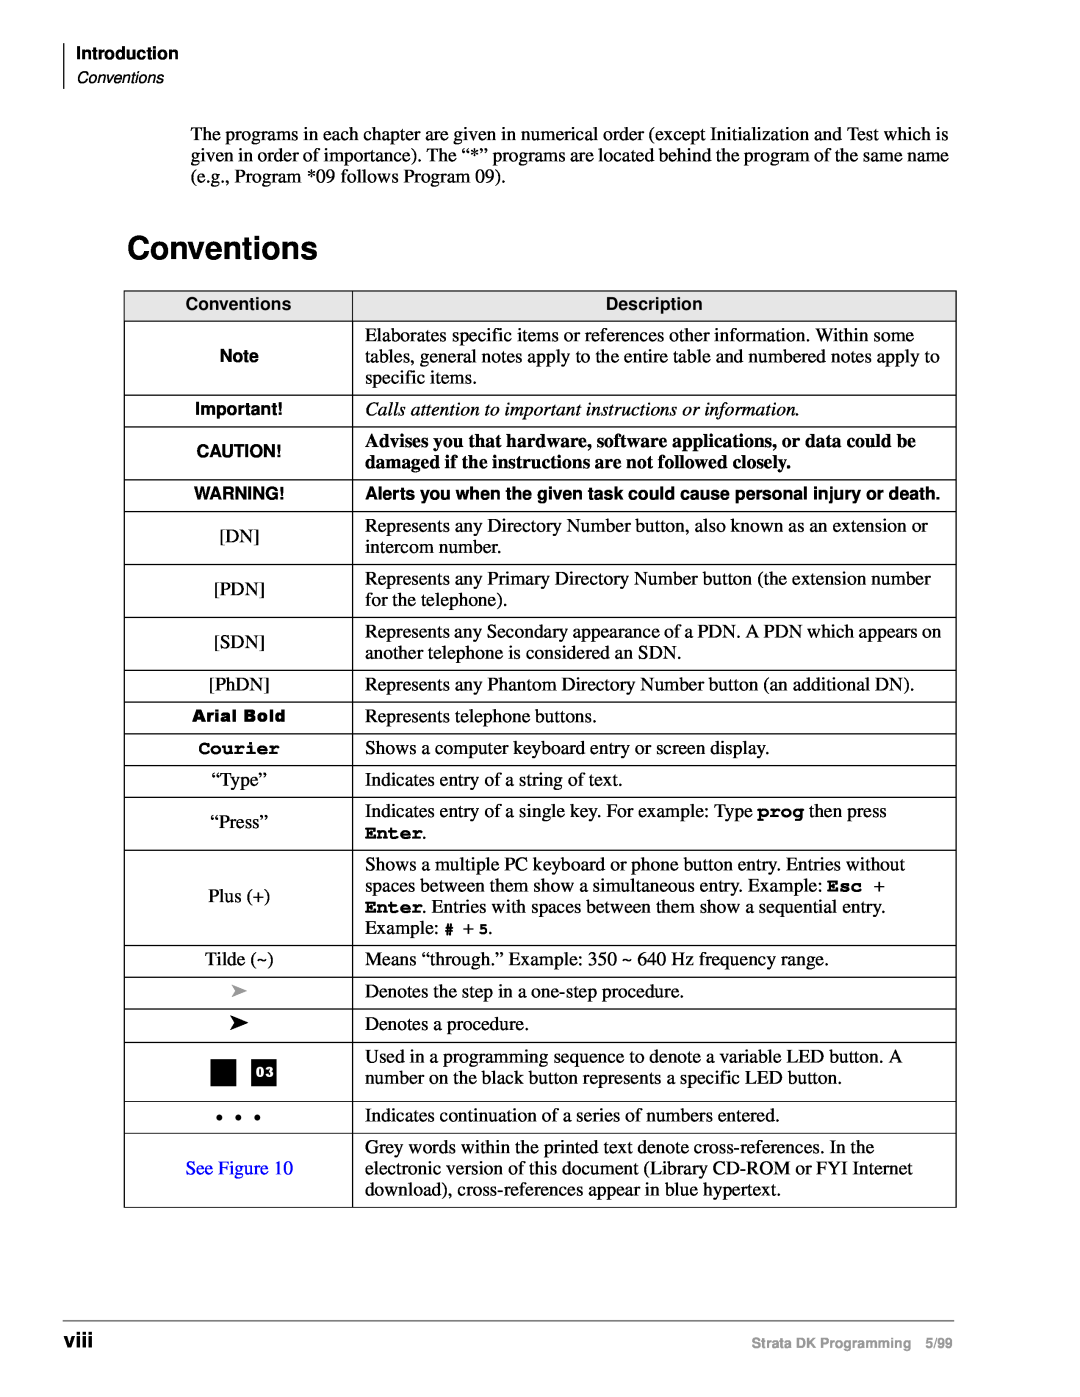 Toshiba dk14 manual Conventions, viii, Enter, See Figure 